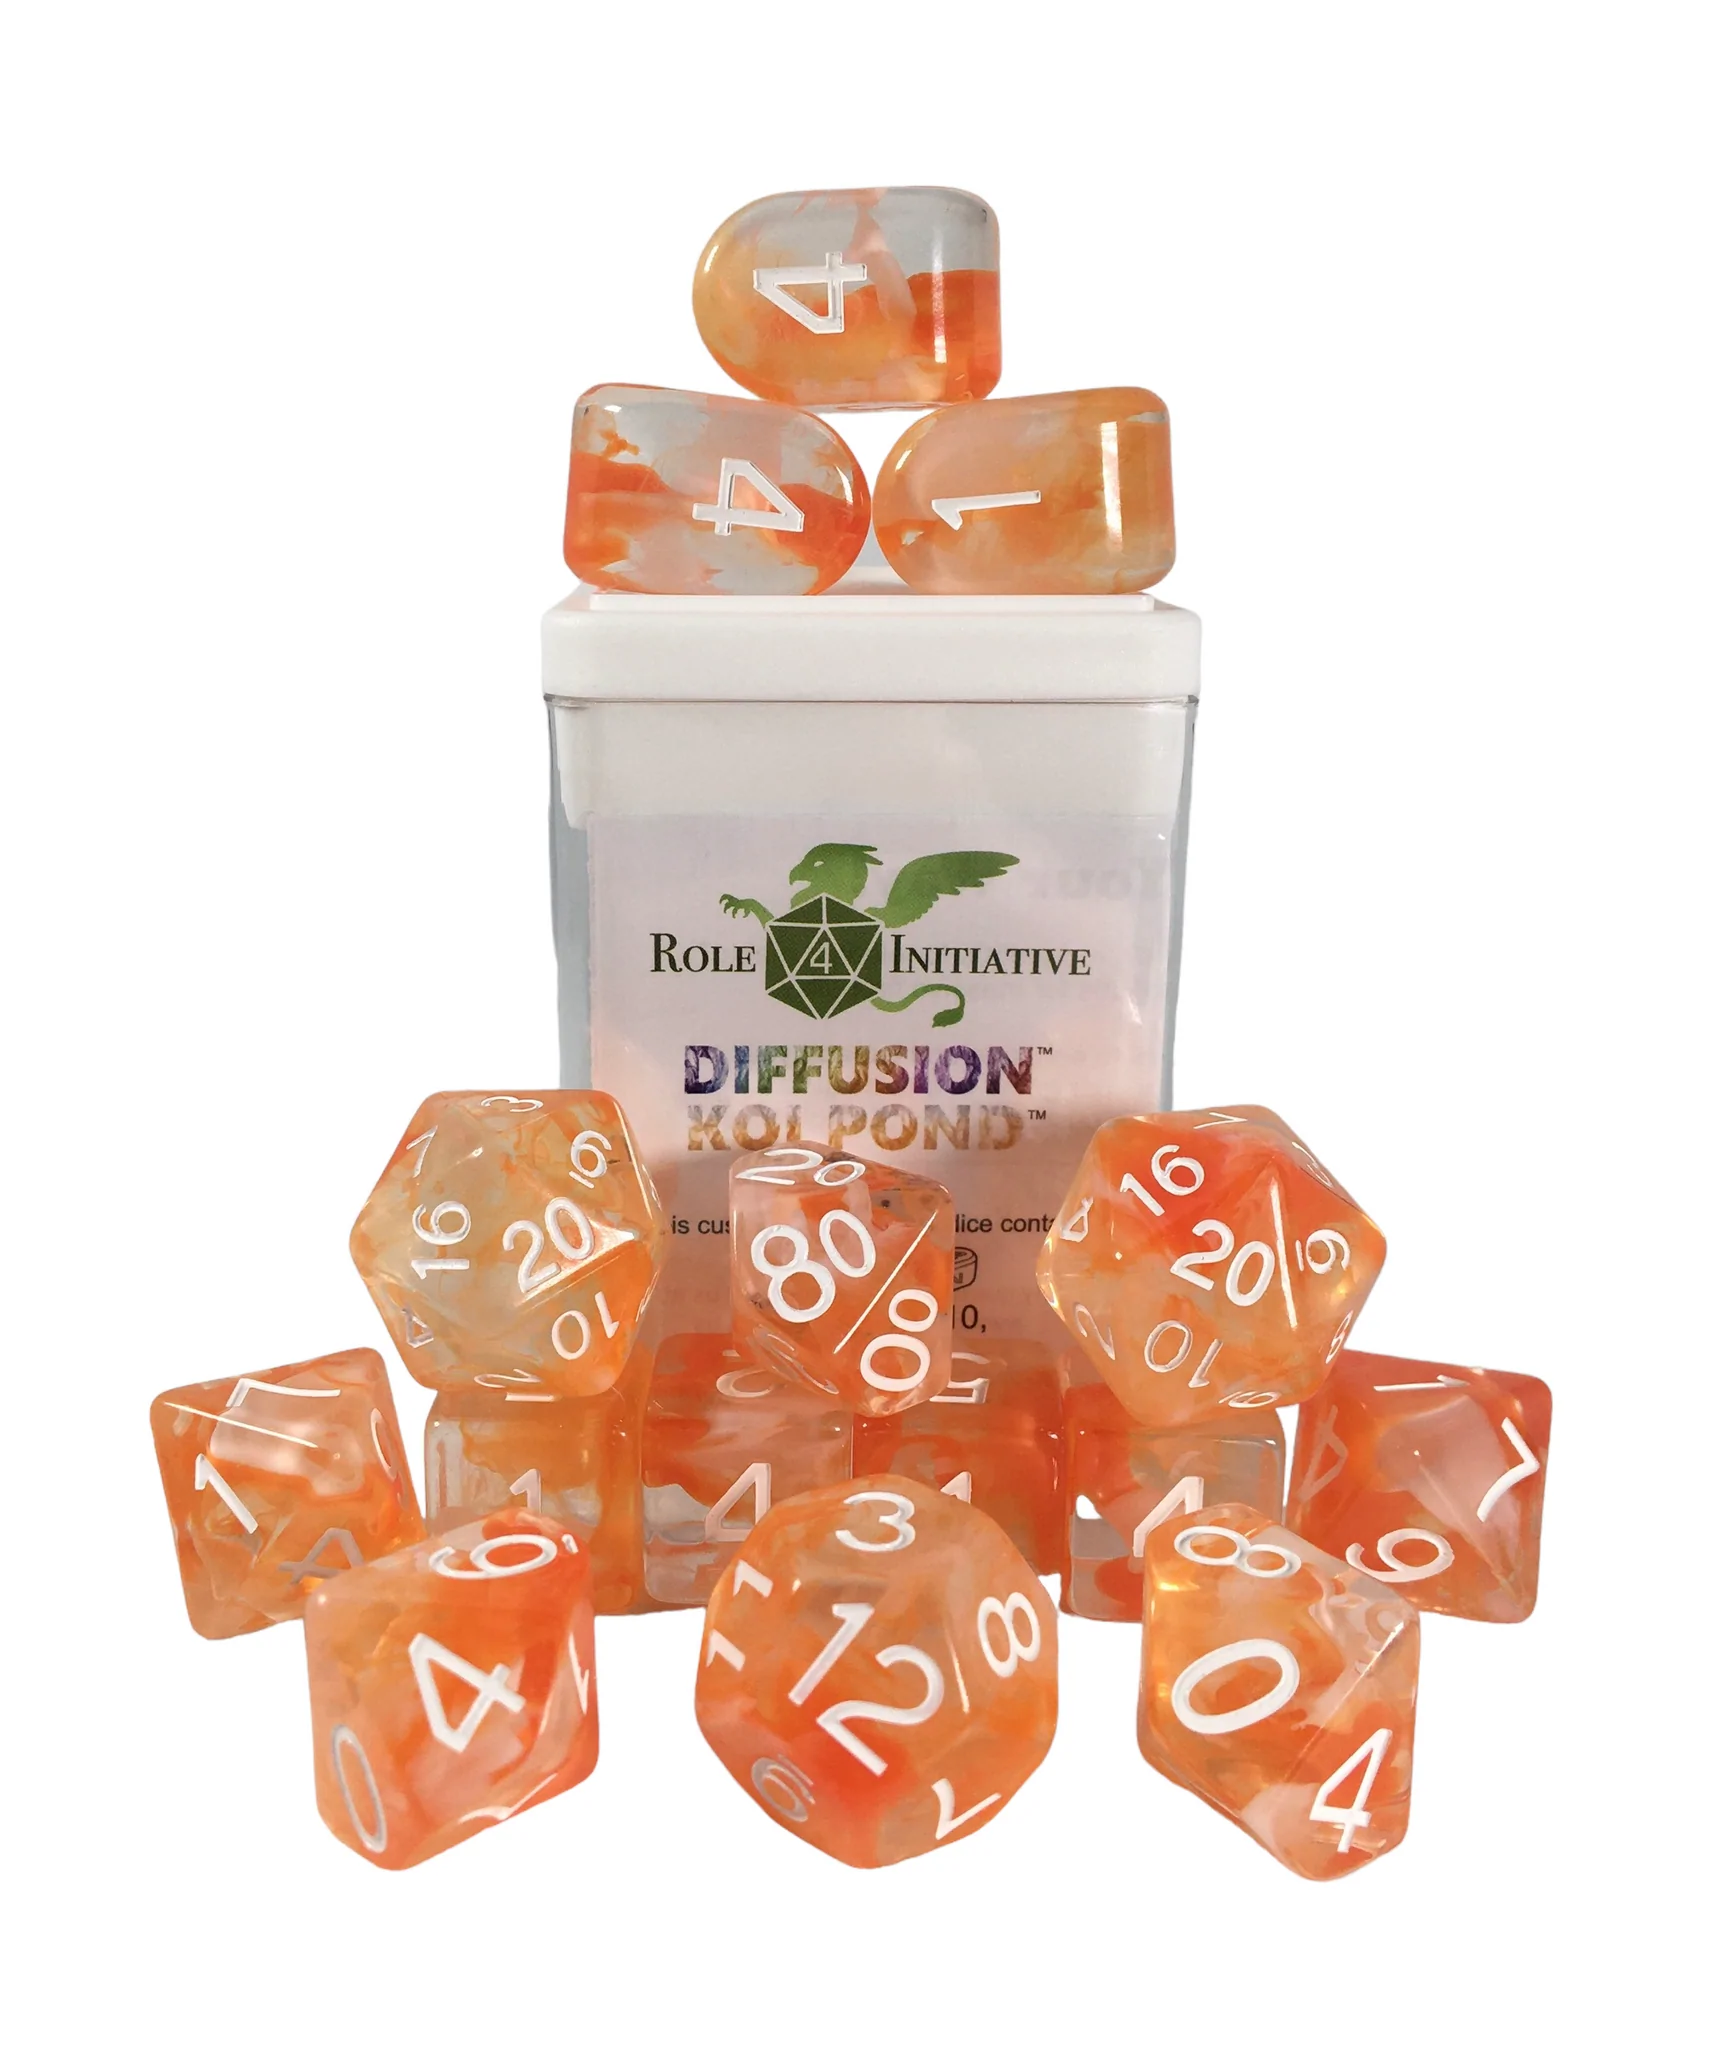 15CT DICE SET WITH ARCHD4: DIFFUSION KOI POND WITH WHITE